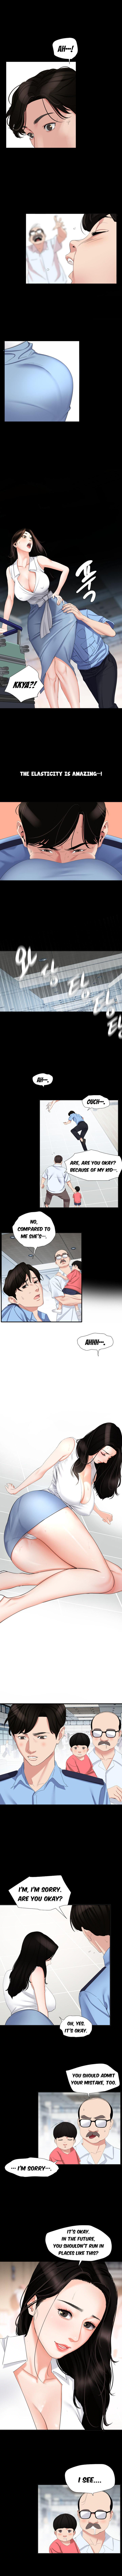 Don’t Be Like This! Son-In-Law 1 [English] 3